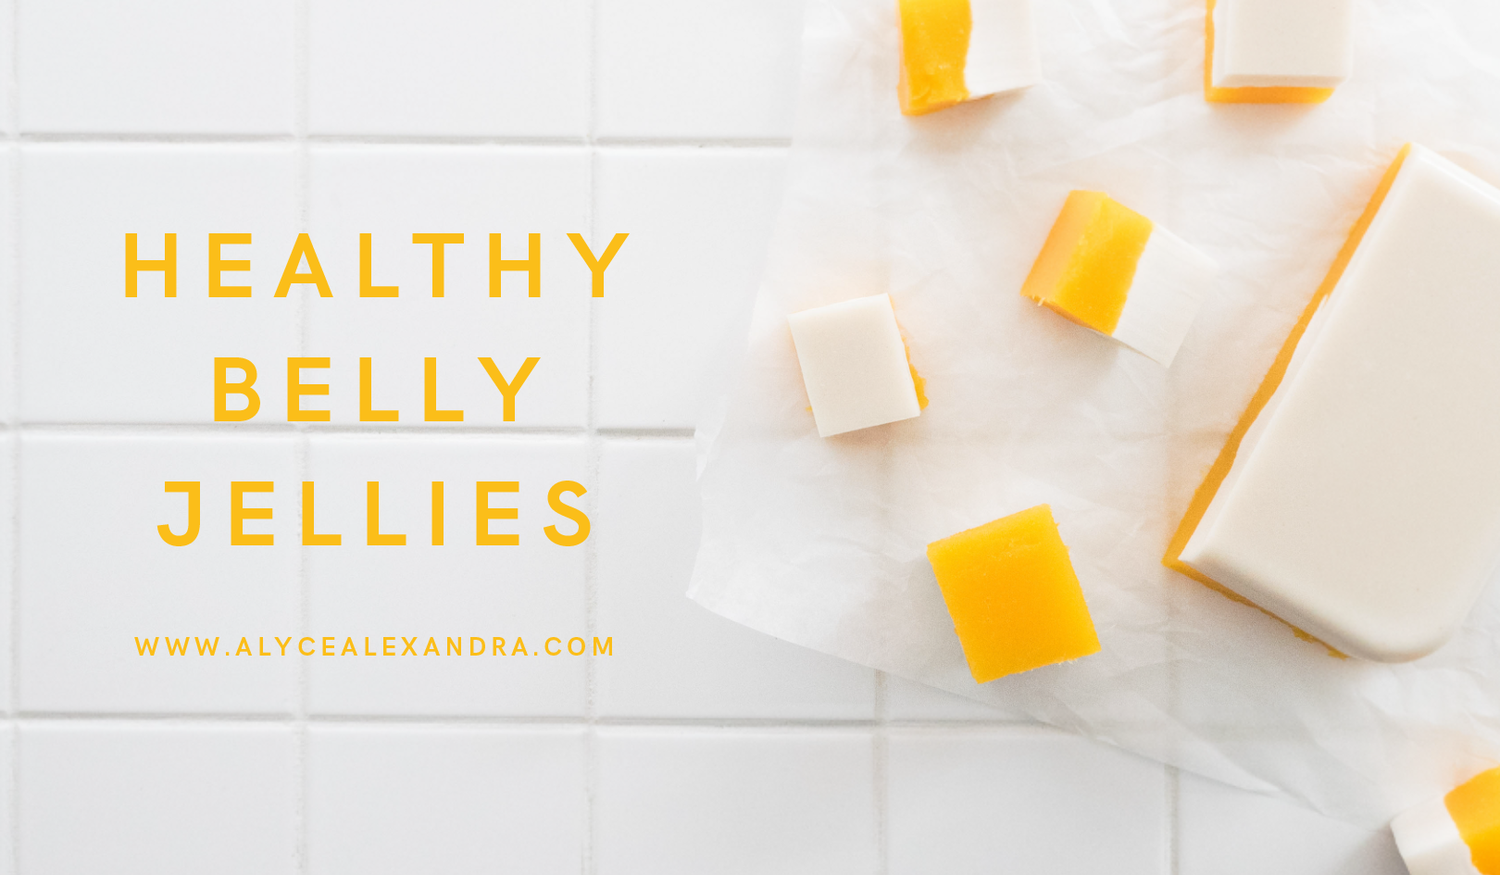 Thermomix Healthy Jellies Recipe